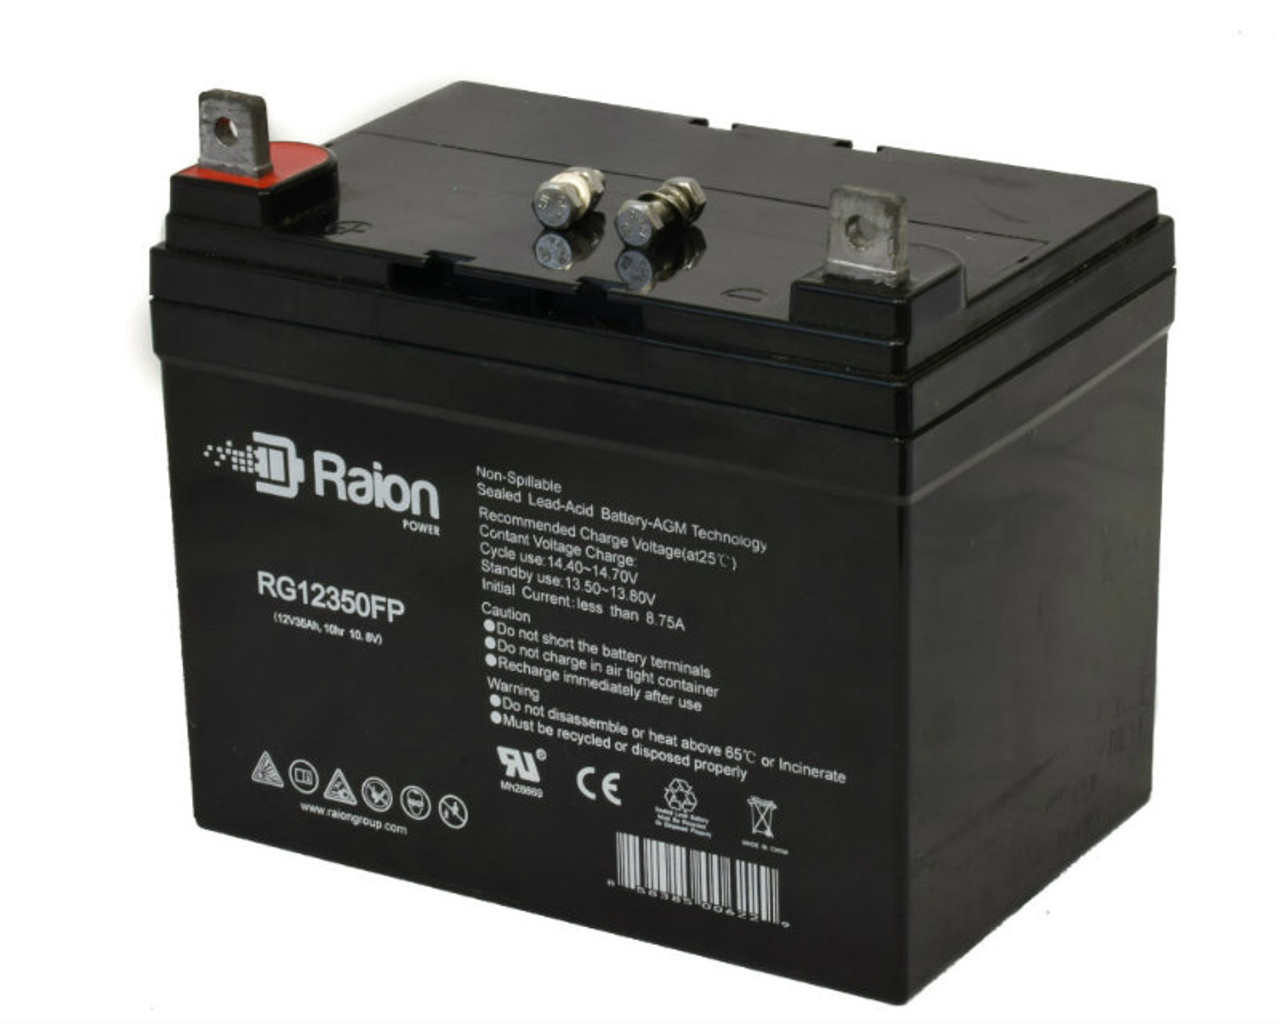 Raion Power Replacement 12V 35Ah RG12350FP Battery for J.I. Case & Case IH 446